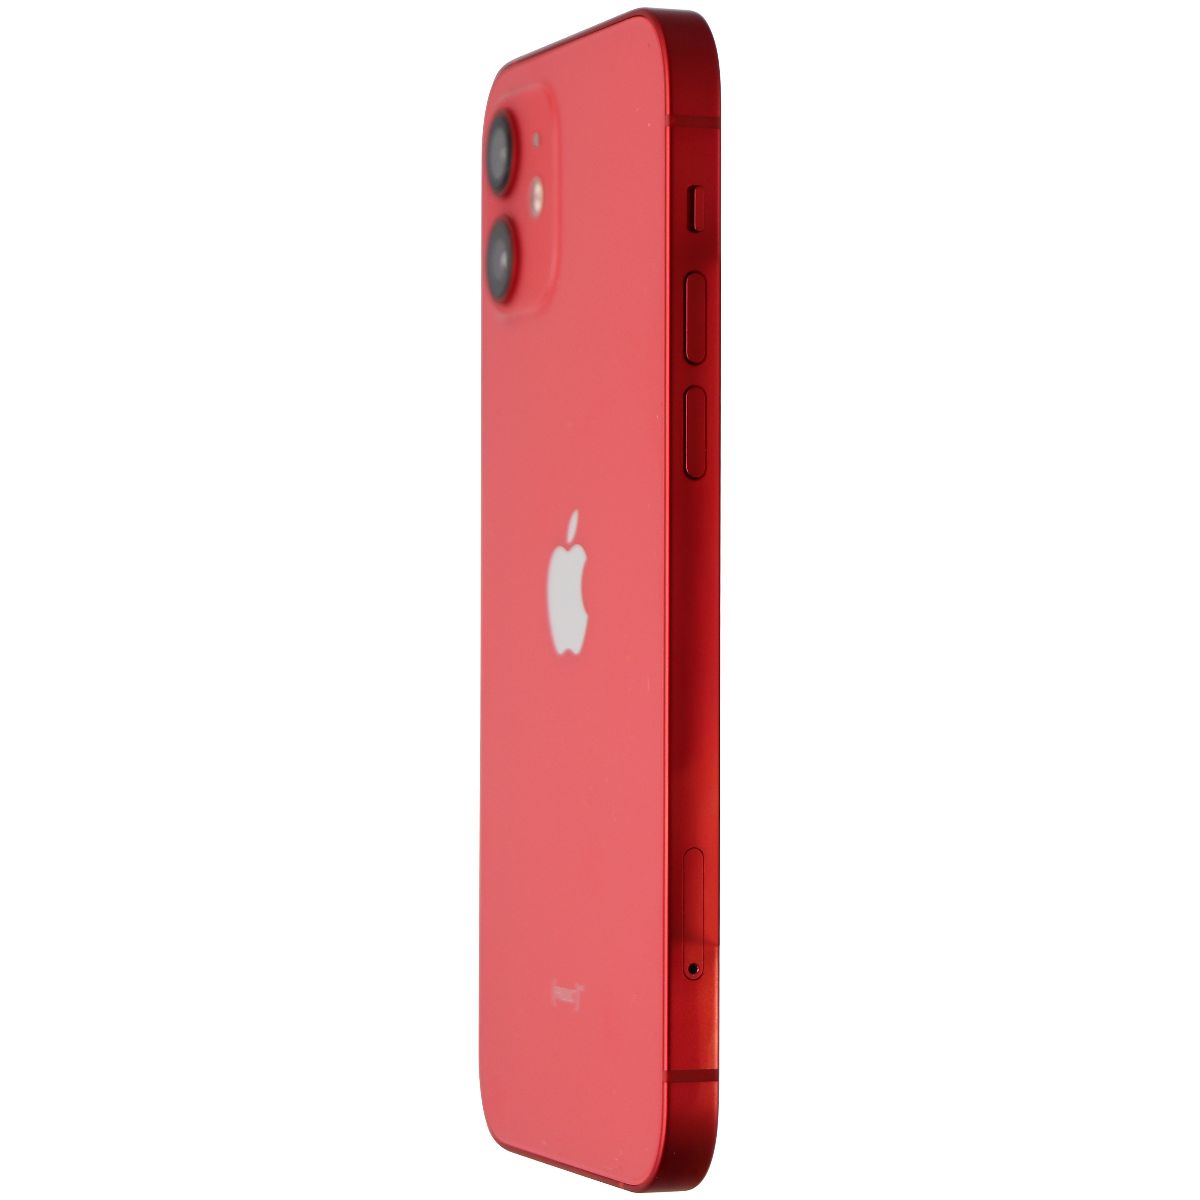 Apple iPhone 12 (6.1-inch) Smartphone (A2172) TracFone/Straight Talk - 64GB/Red Cell Phones & Smartphones Apple    - Simple Cell Bulk Wholesale Pricing - USA Seller